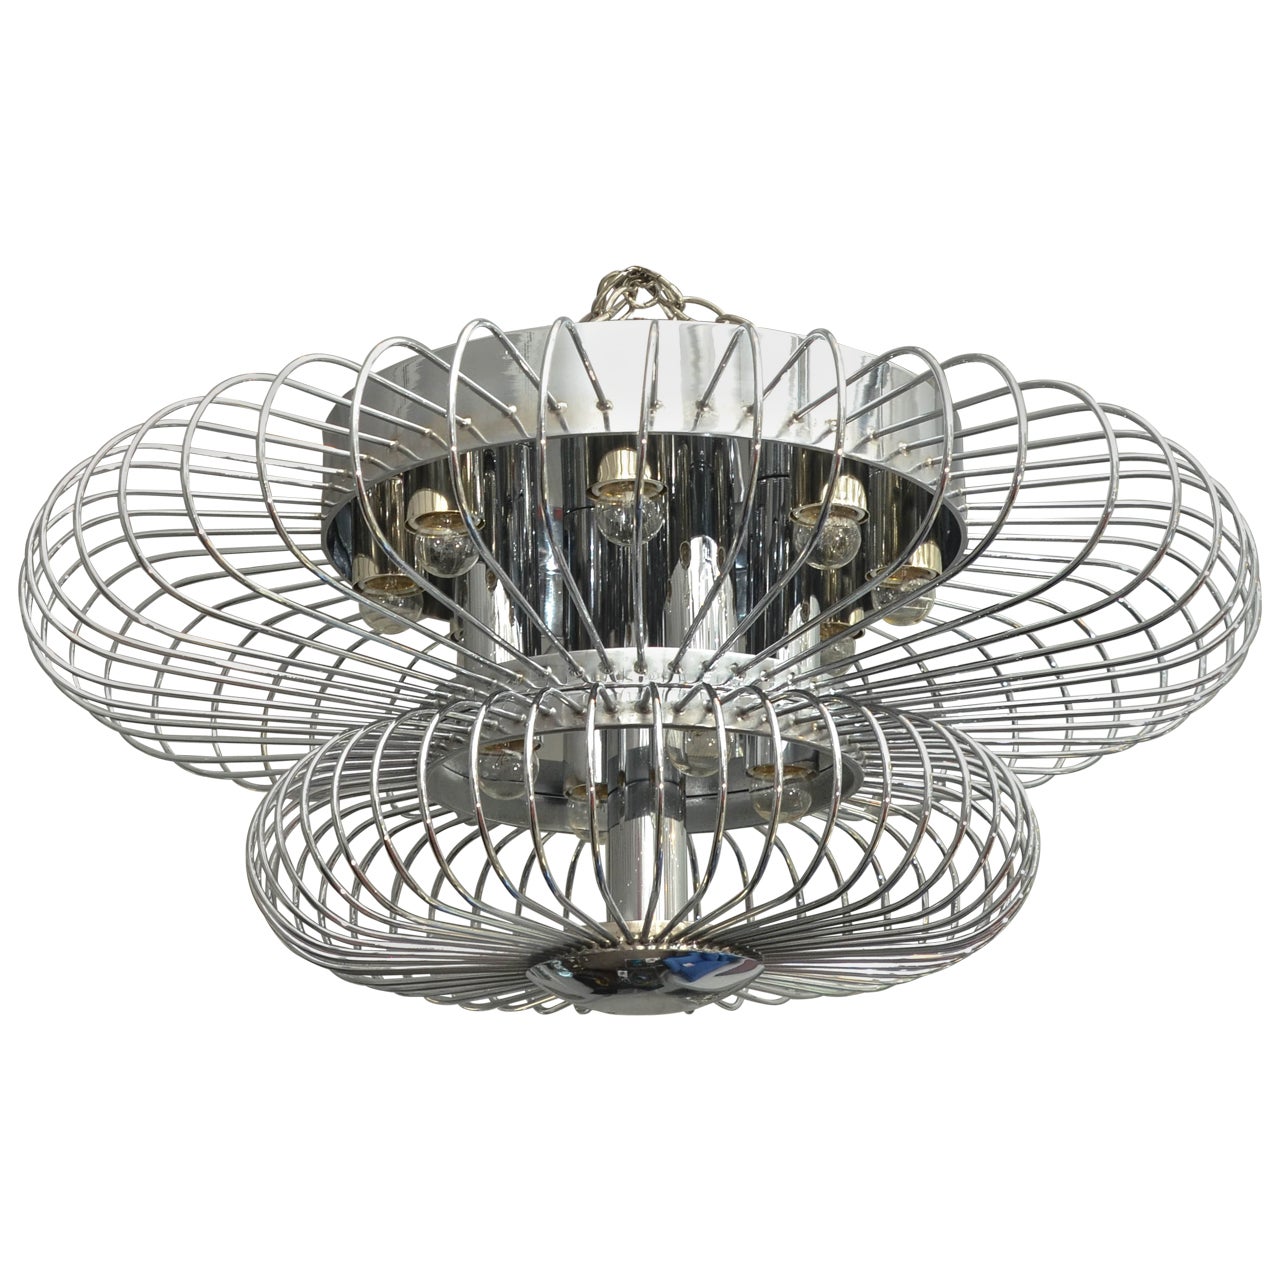 Stainless Steel Ceiling Fixture with Two Tiers of Coil Detailing